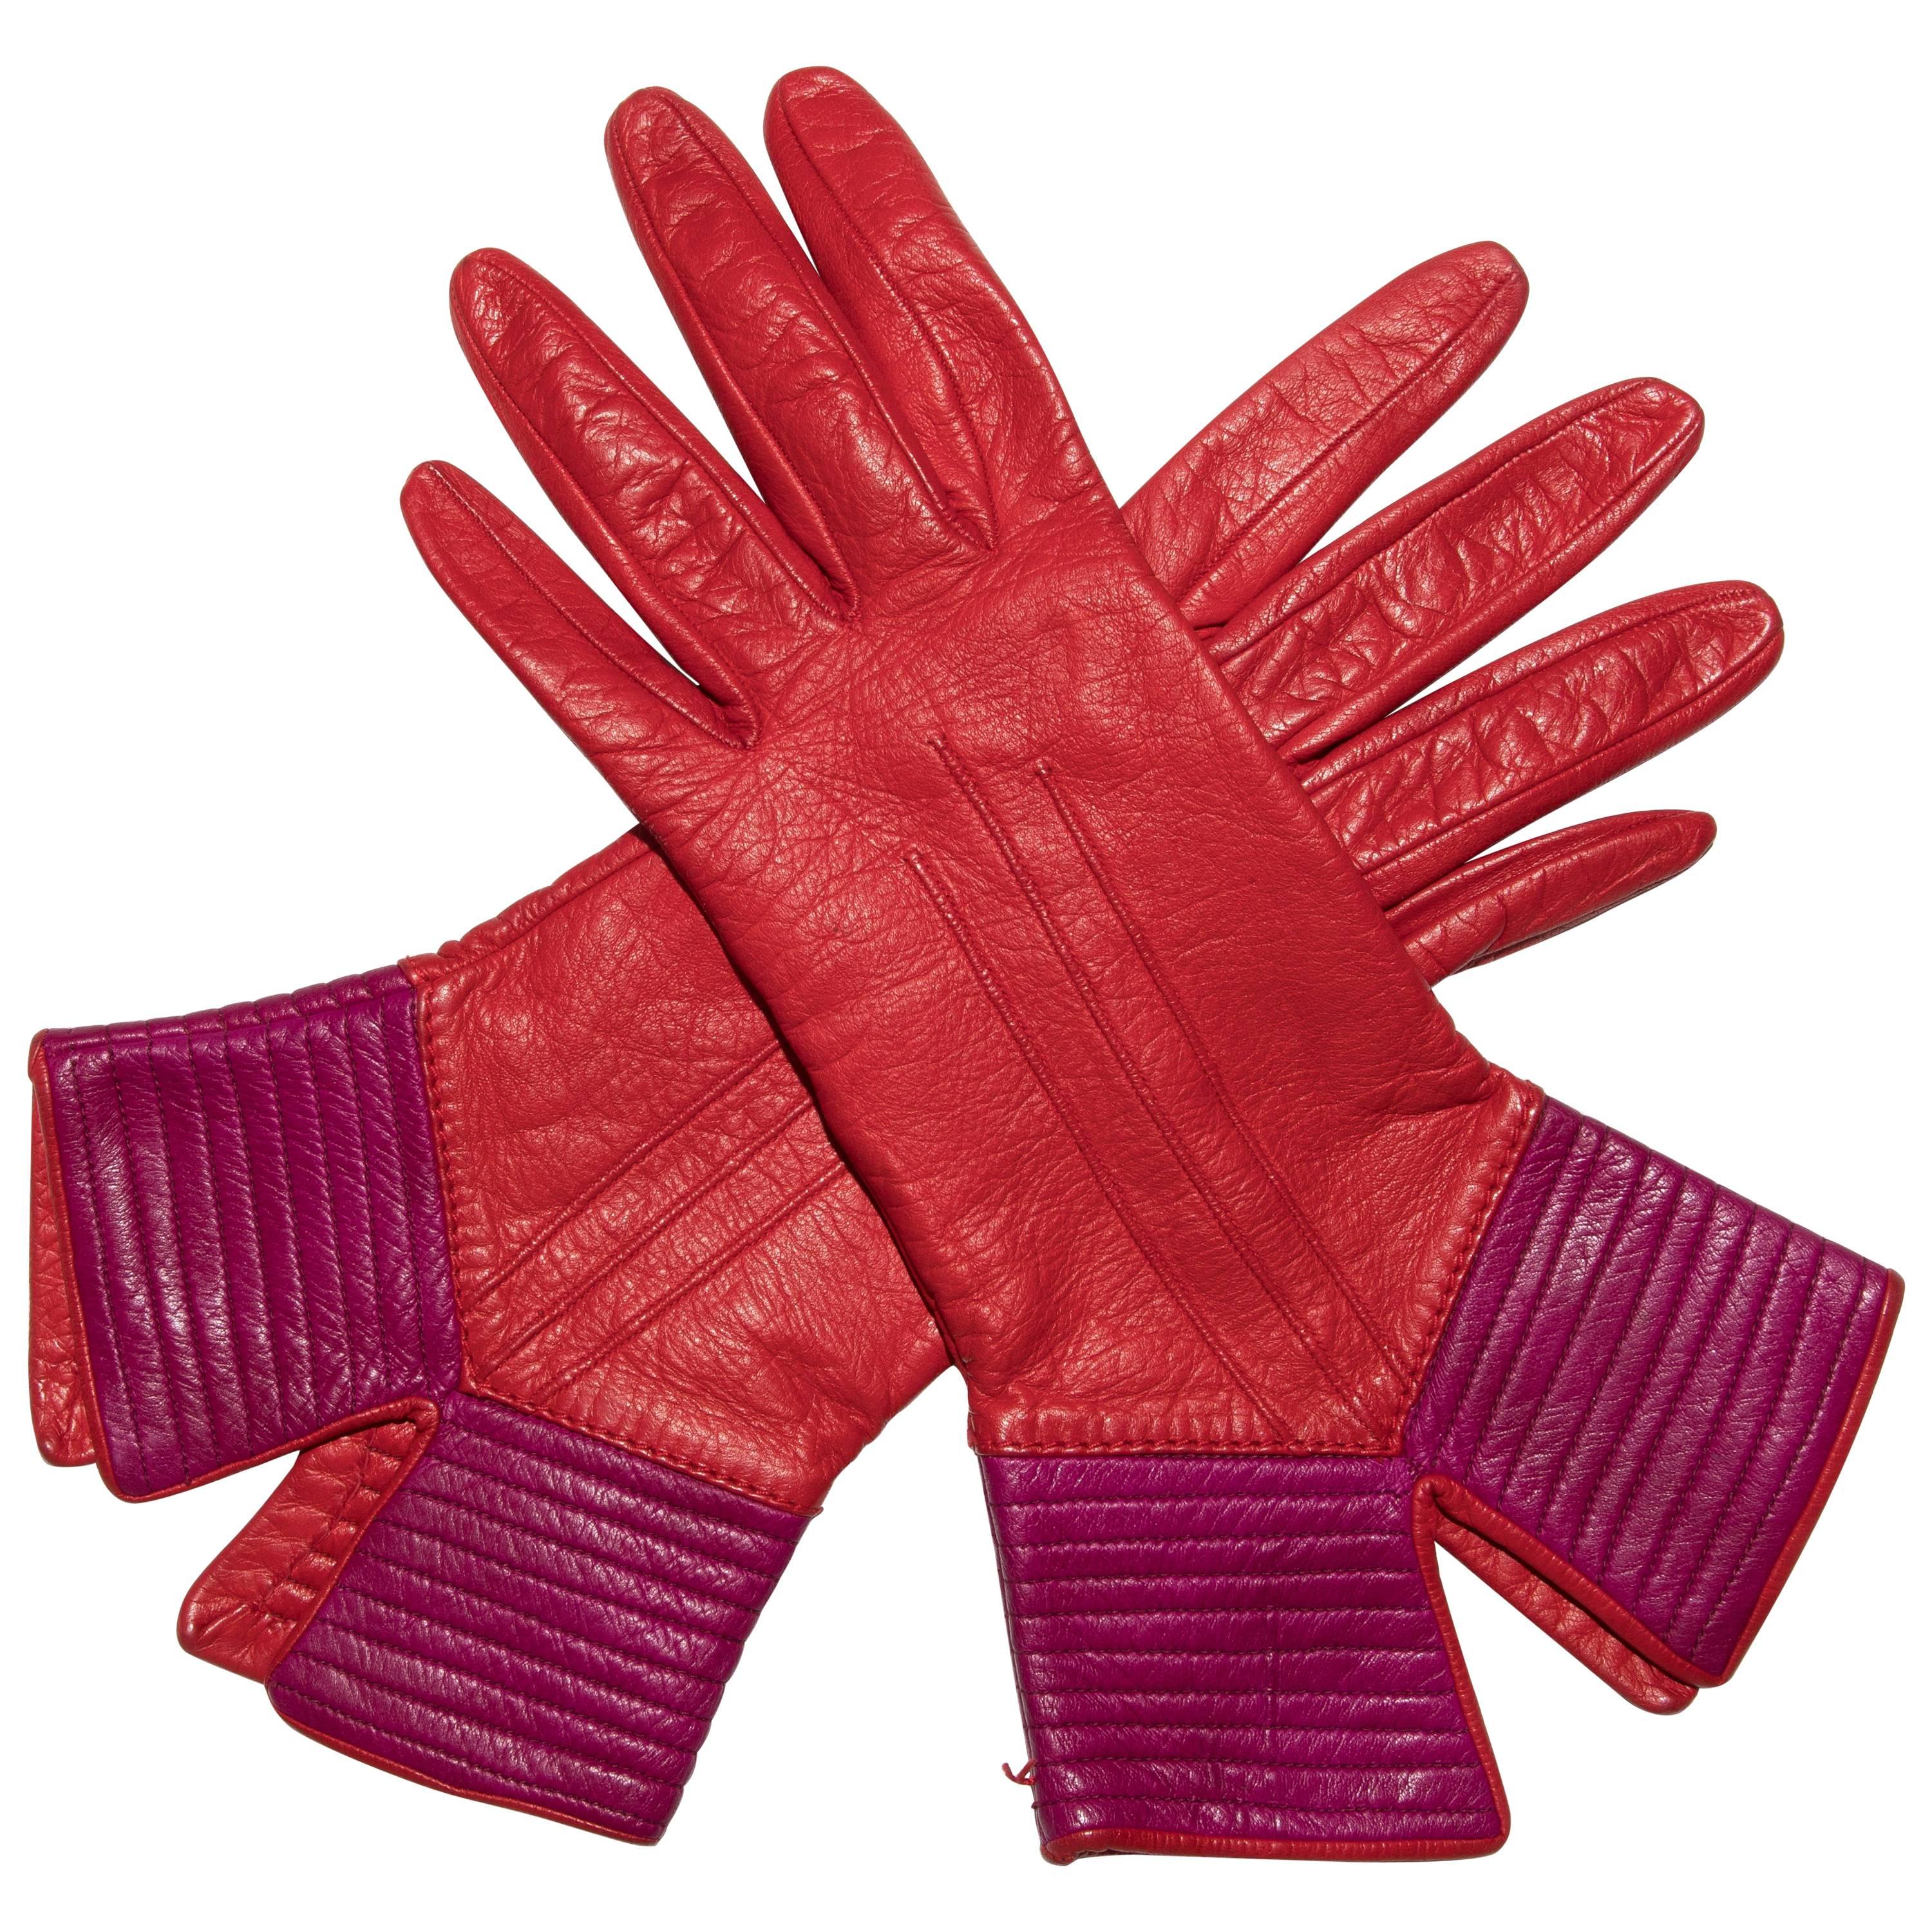 Yves Saint Laurent Color-Block Leather Gloves Silk Lining, Circa 1970s For Sale